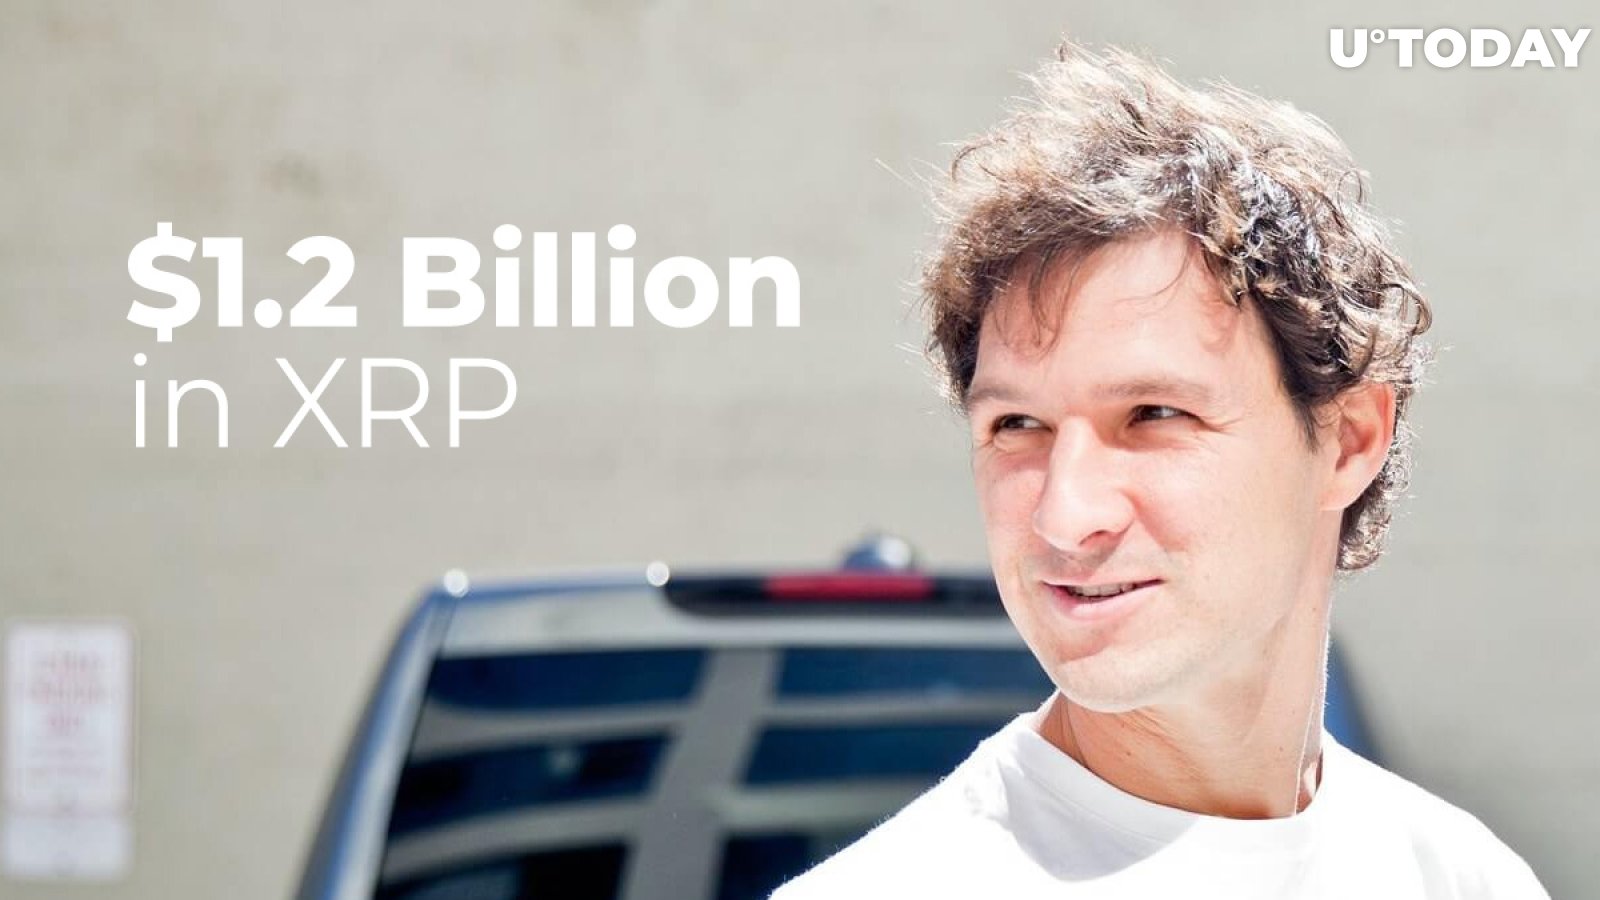 Jed McCaleb's Estimated XRP Holdings and Profits Total $1.2 Billion, Recent Data Says